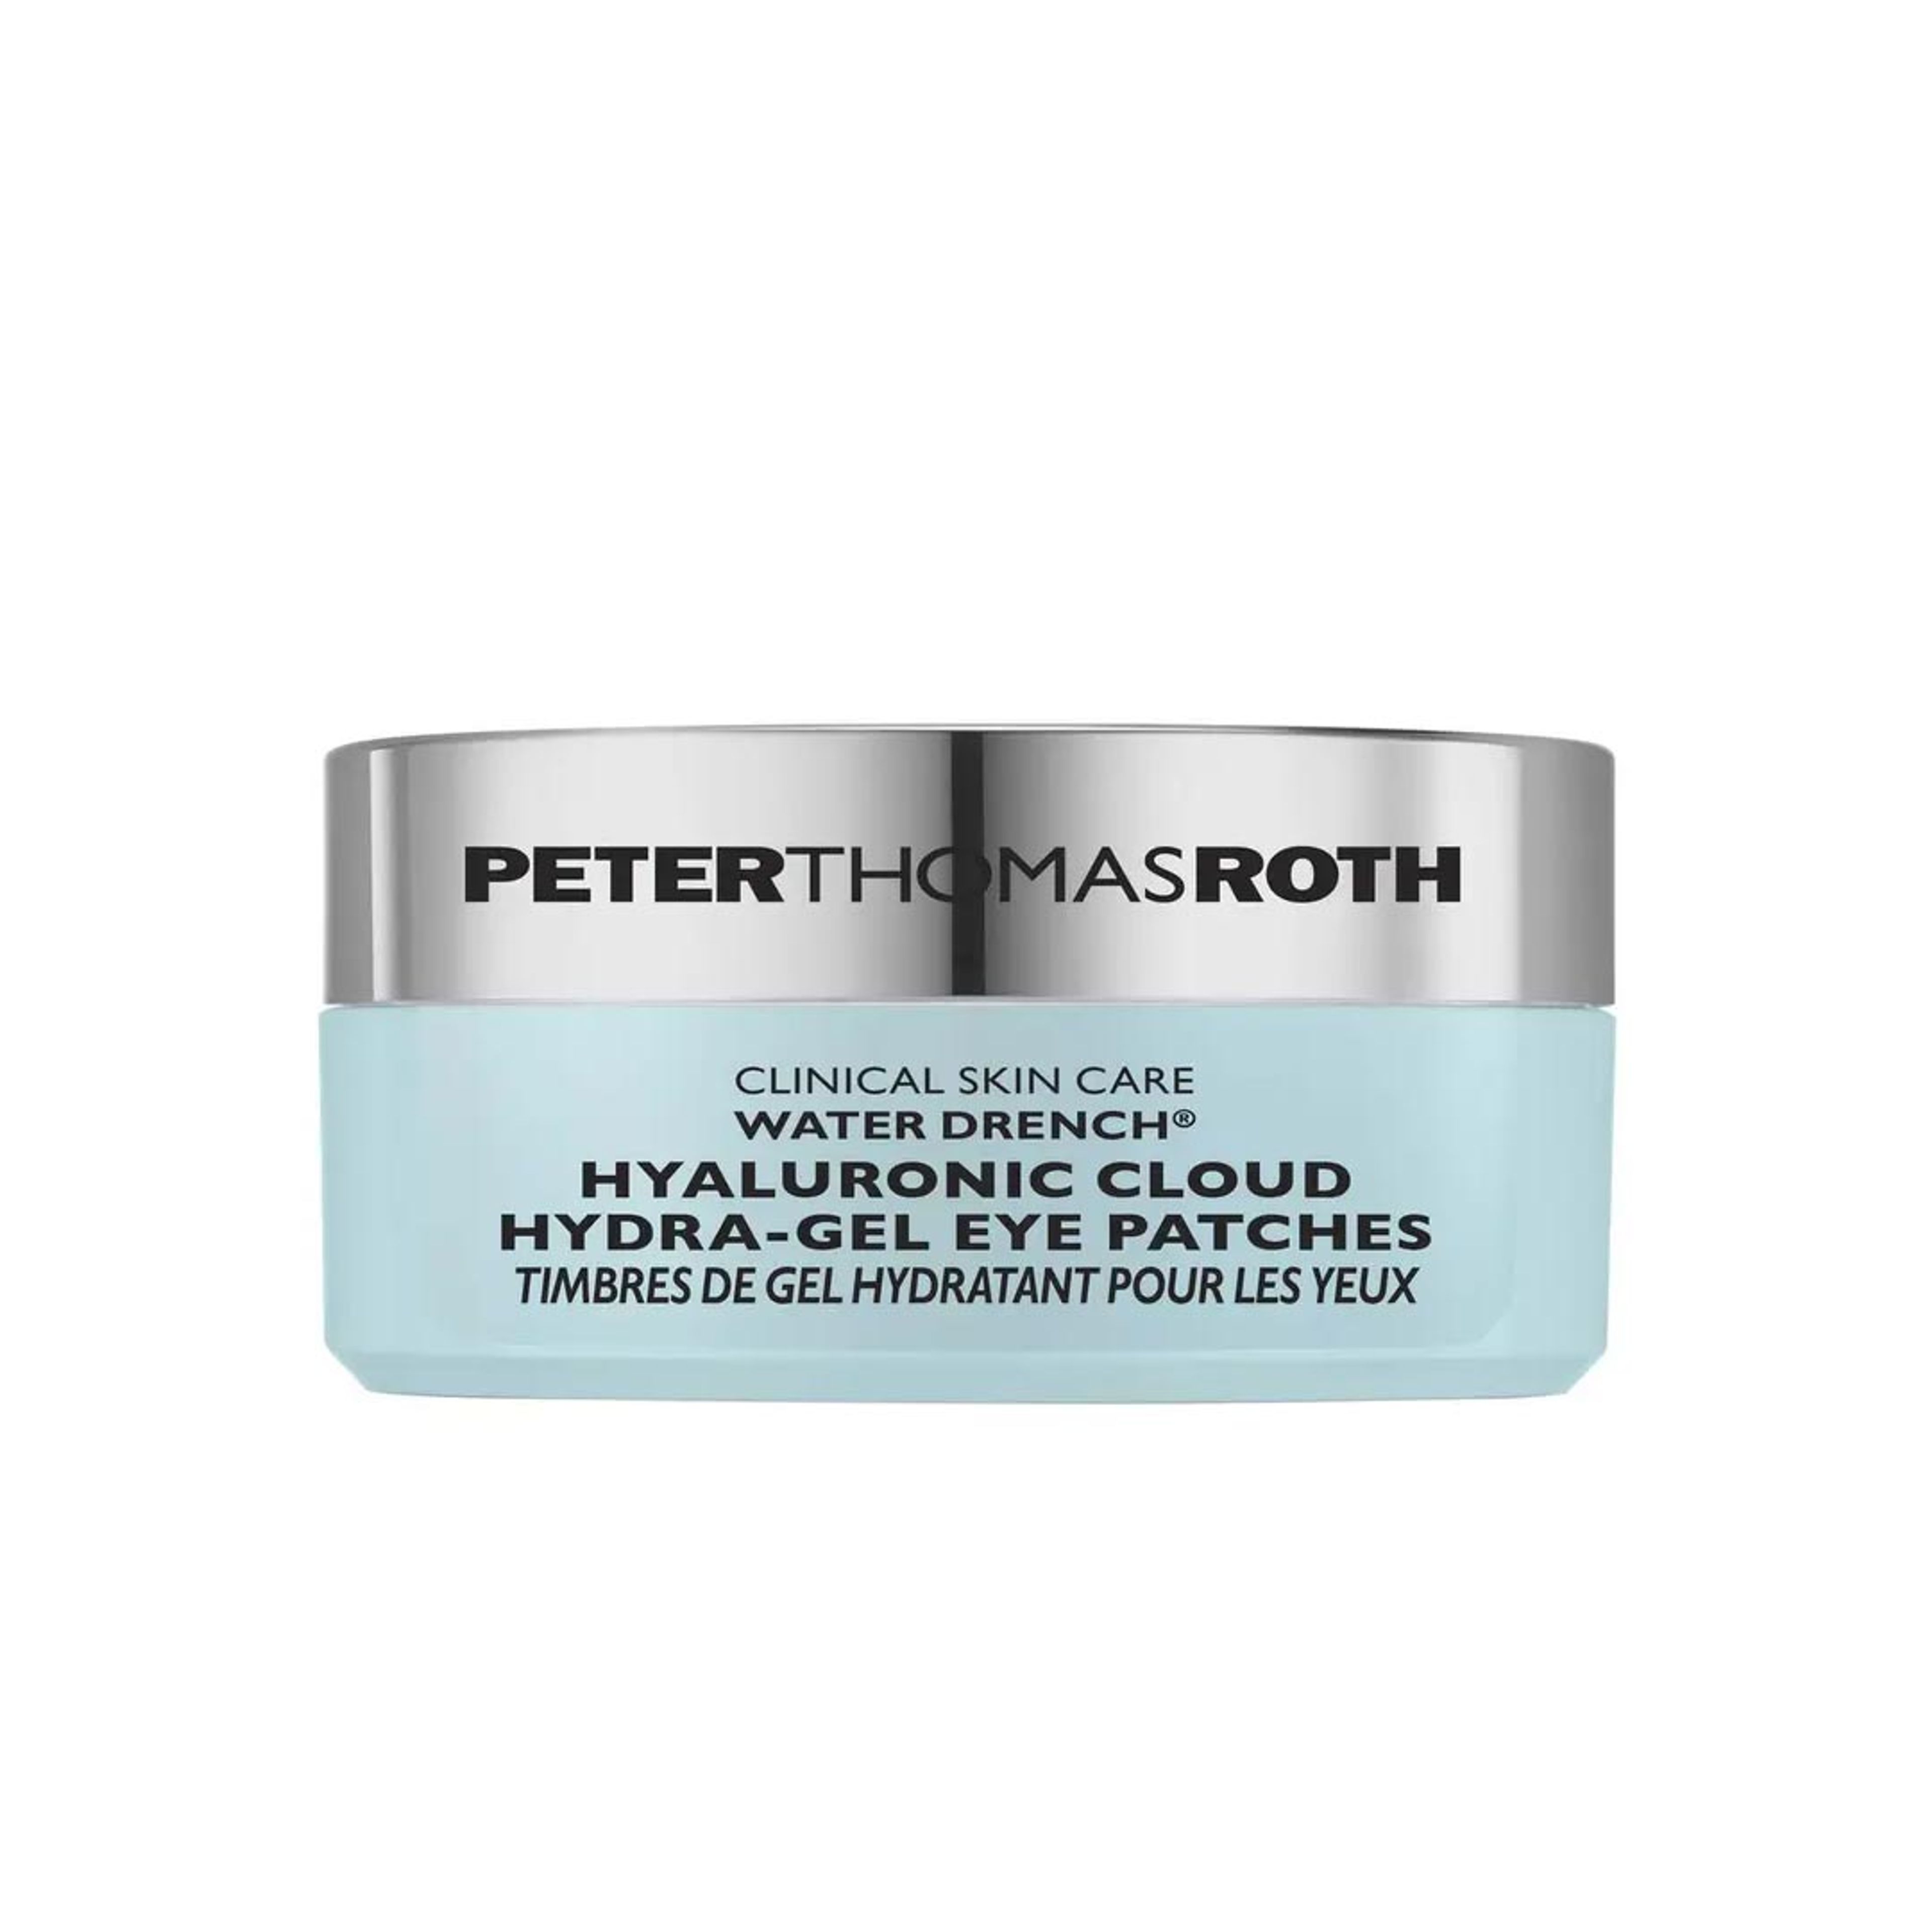 Water Drench Hyaluronic Cloud Hydra-Gel Eye Patches 